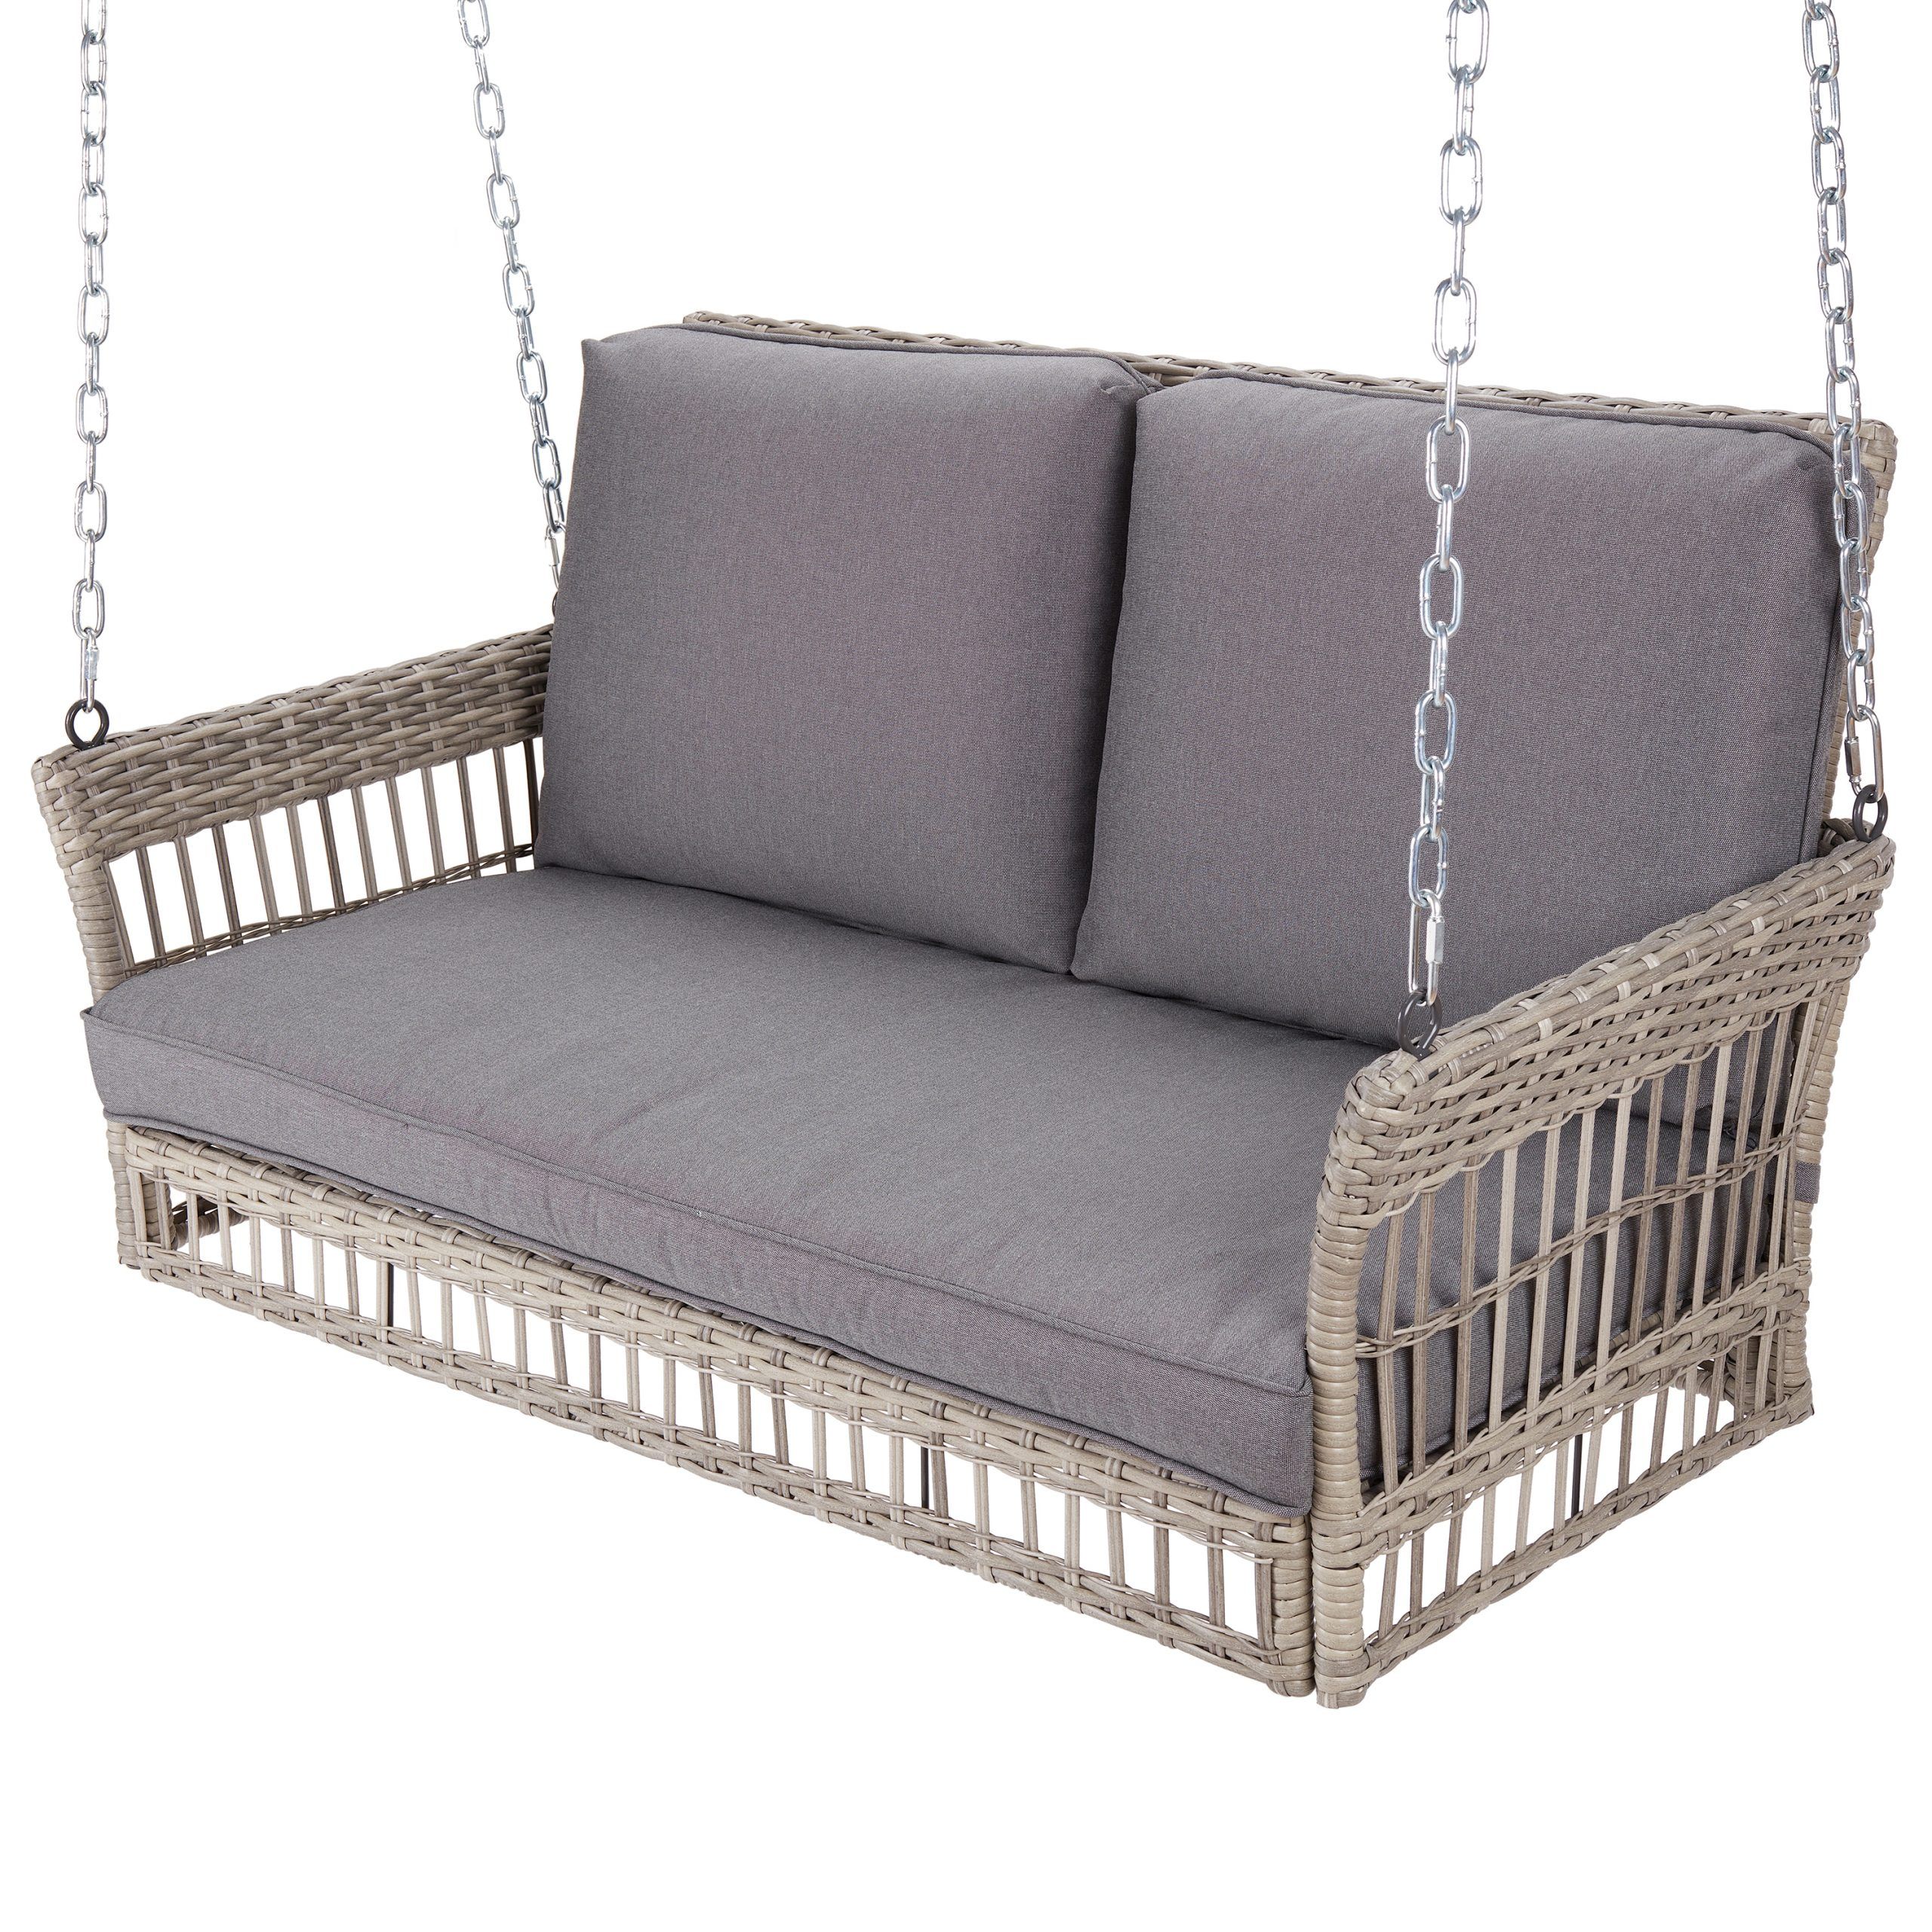 Better Homes & Gardens Belfair Outdoor Wicker Porch Swing Within 2 Person Outdoor Convertible Canopy Swing Gliders With Removable Cushions Beige (View 19 of 25)